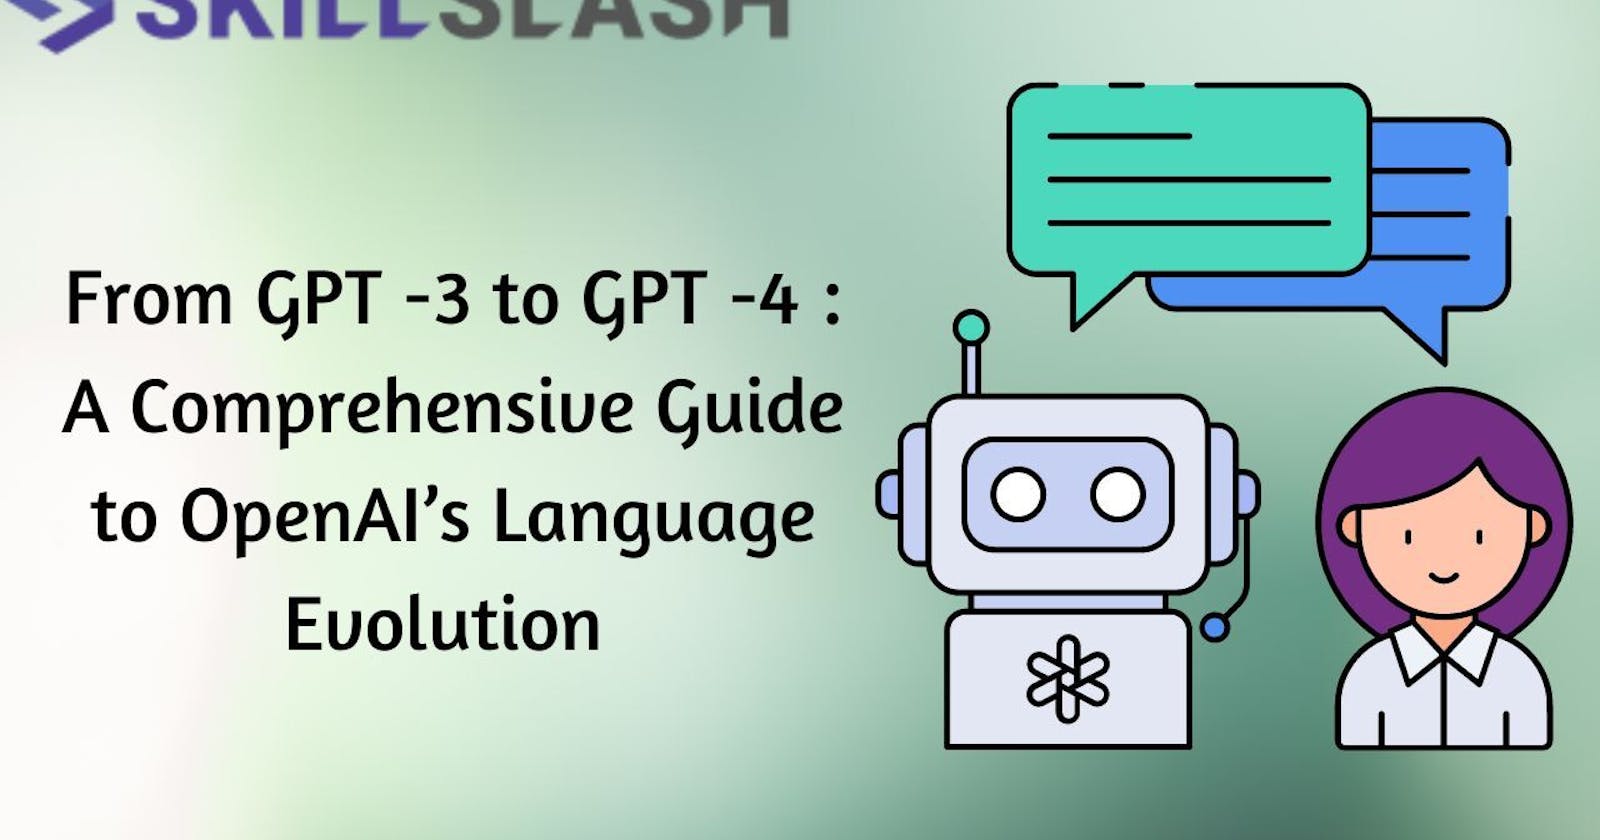 From GPT -3 to GPT -4 : A Comprehensive Guide to OpenAI’s Language Evolution